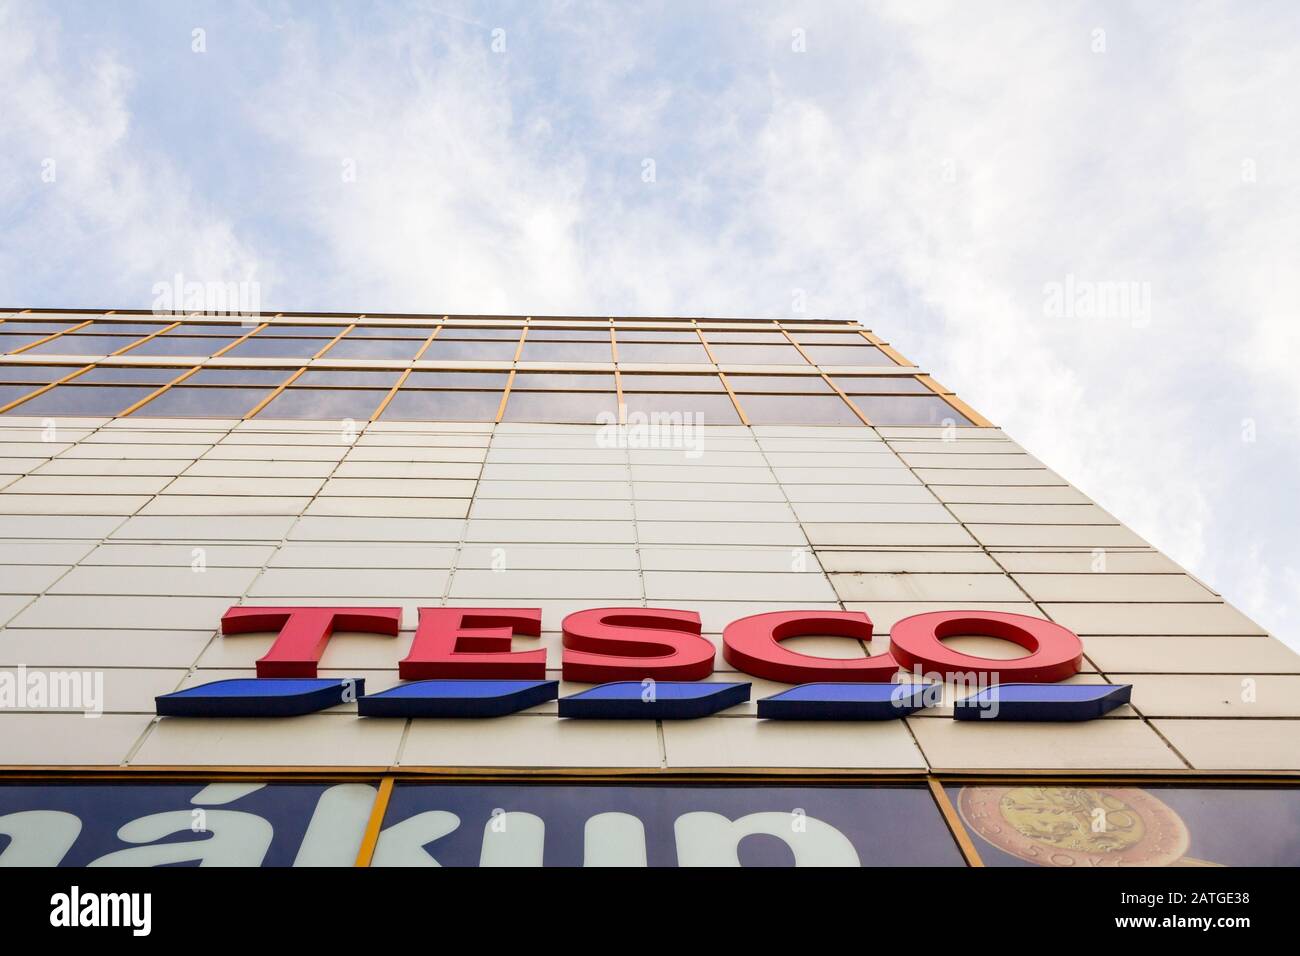 PRAGUE, CZECHIA - NOVEMBER 2, 2019: Tesco logo on their main supermaket in Szeged. Tesco is a british supermarket, groceries and general merchandise r Stock Photo